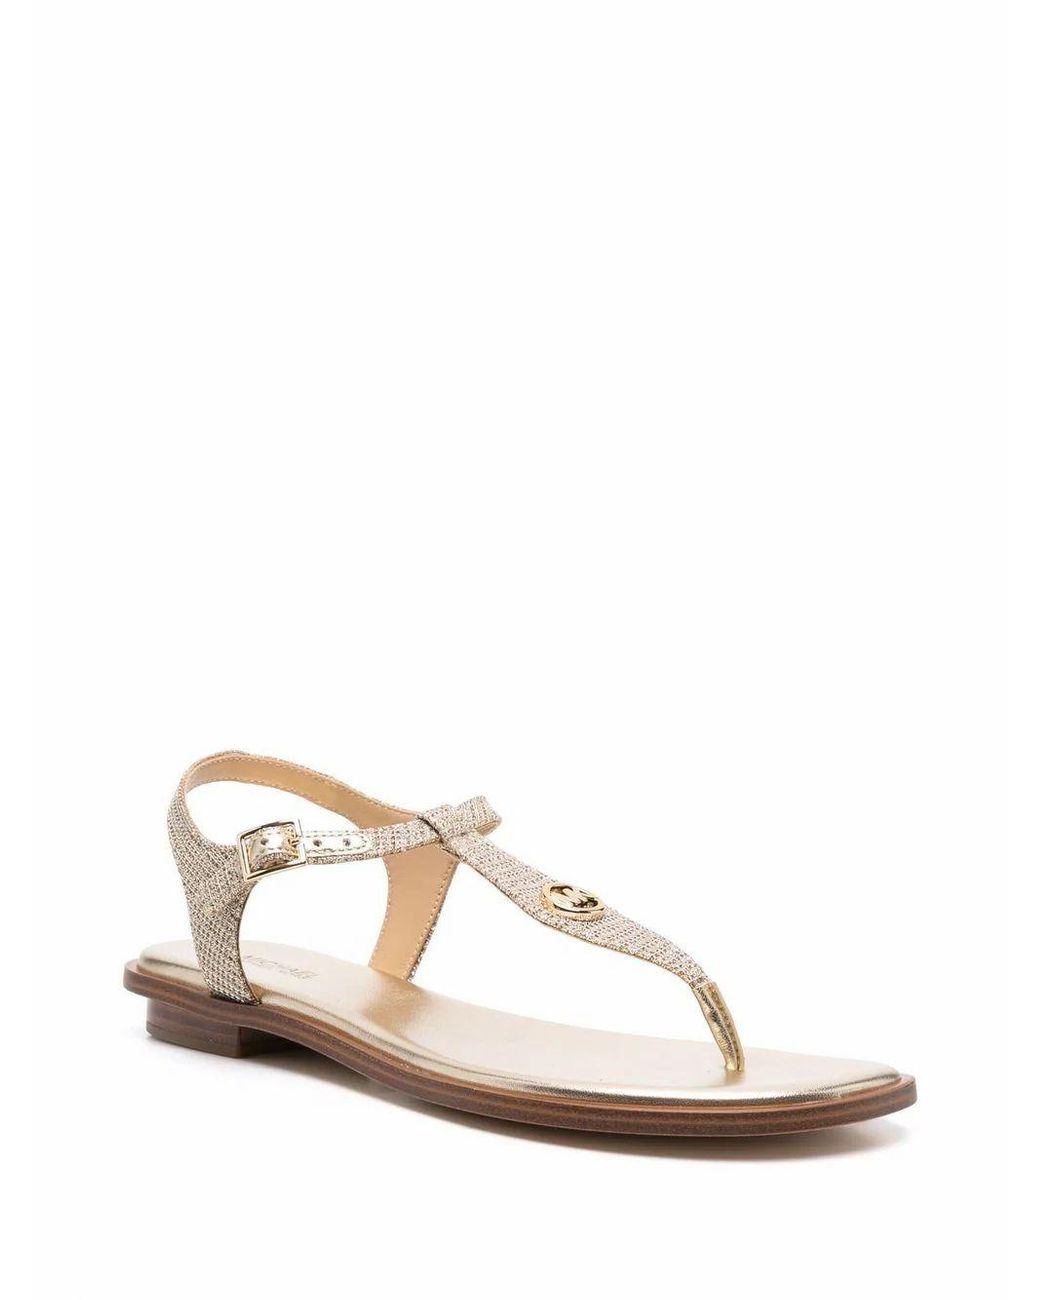 Michael Kors Leather Sandals in Gold (Metallic) | Lyst